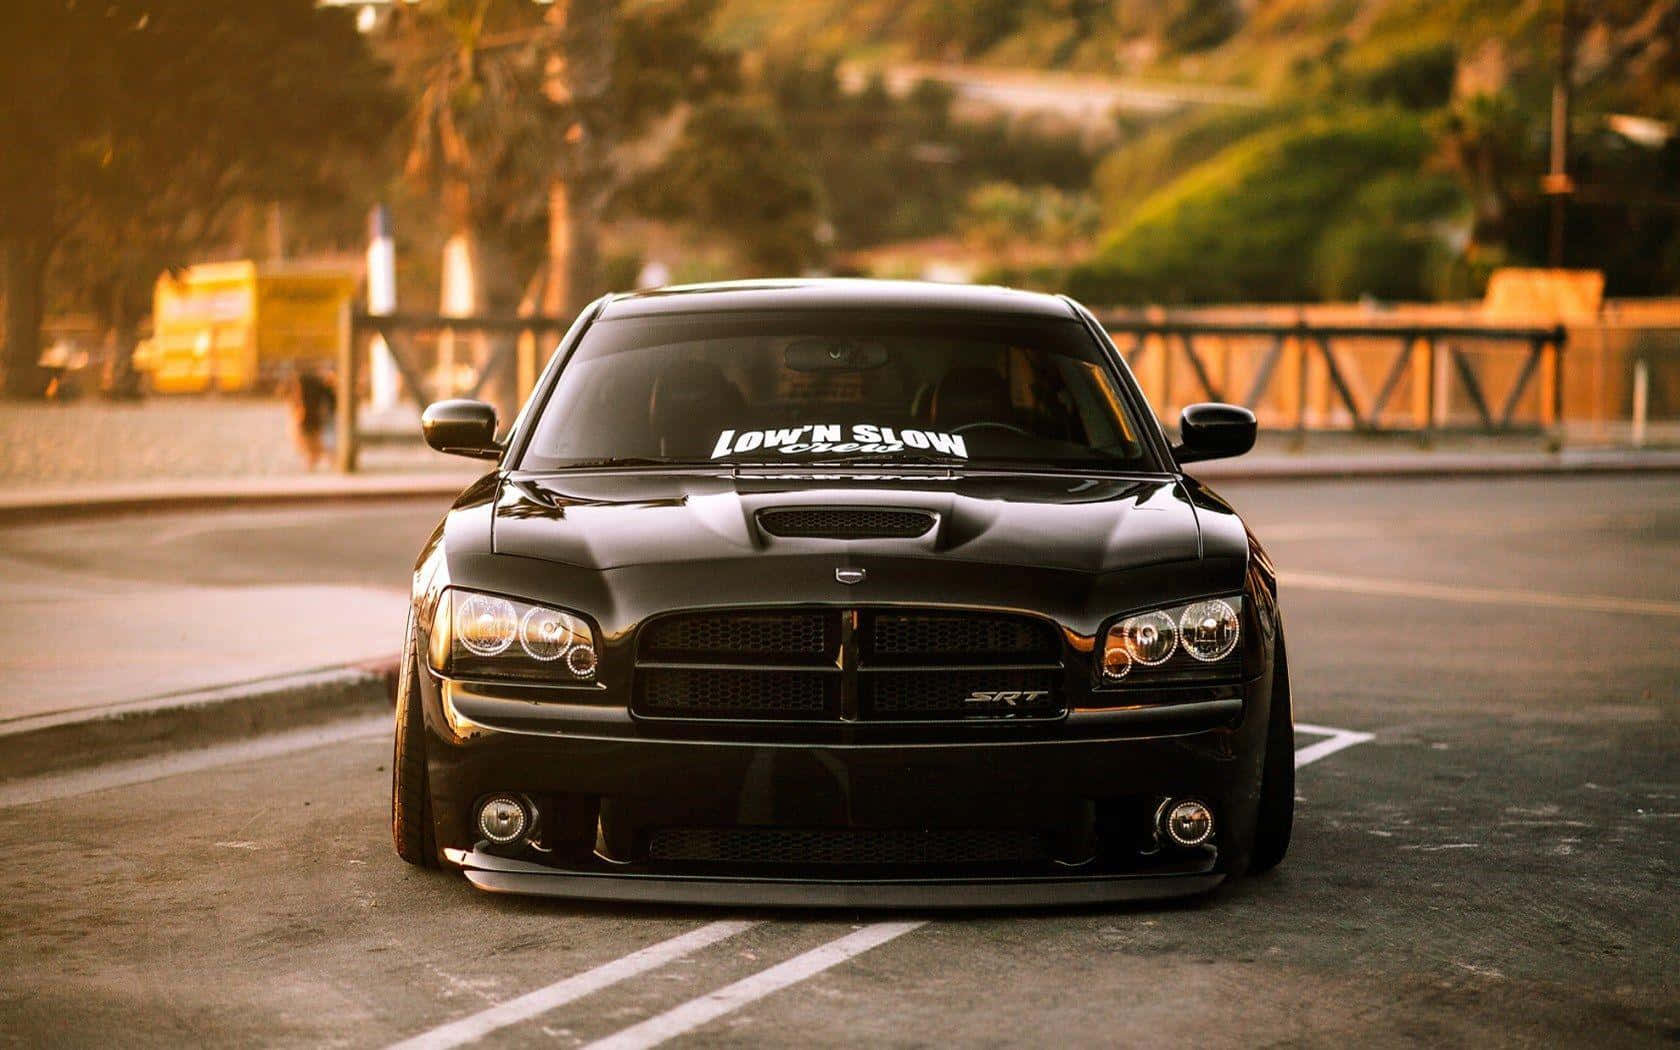 Black Dodge Charger S R T Lowand Slow Wallpaper